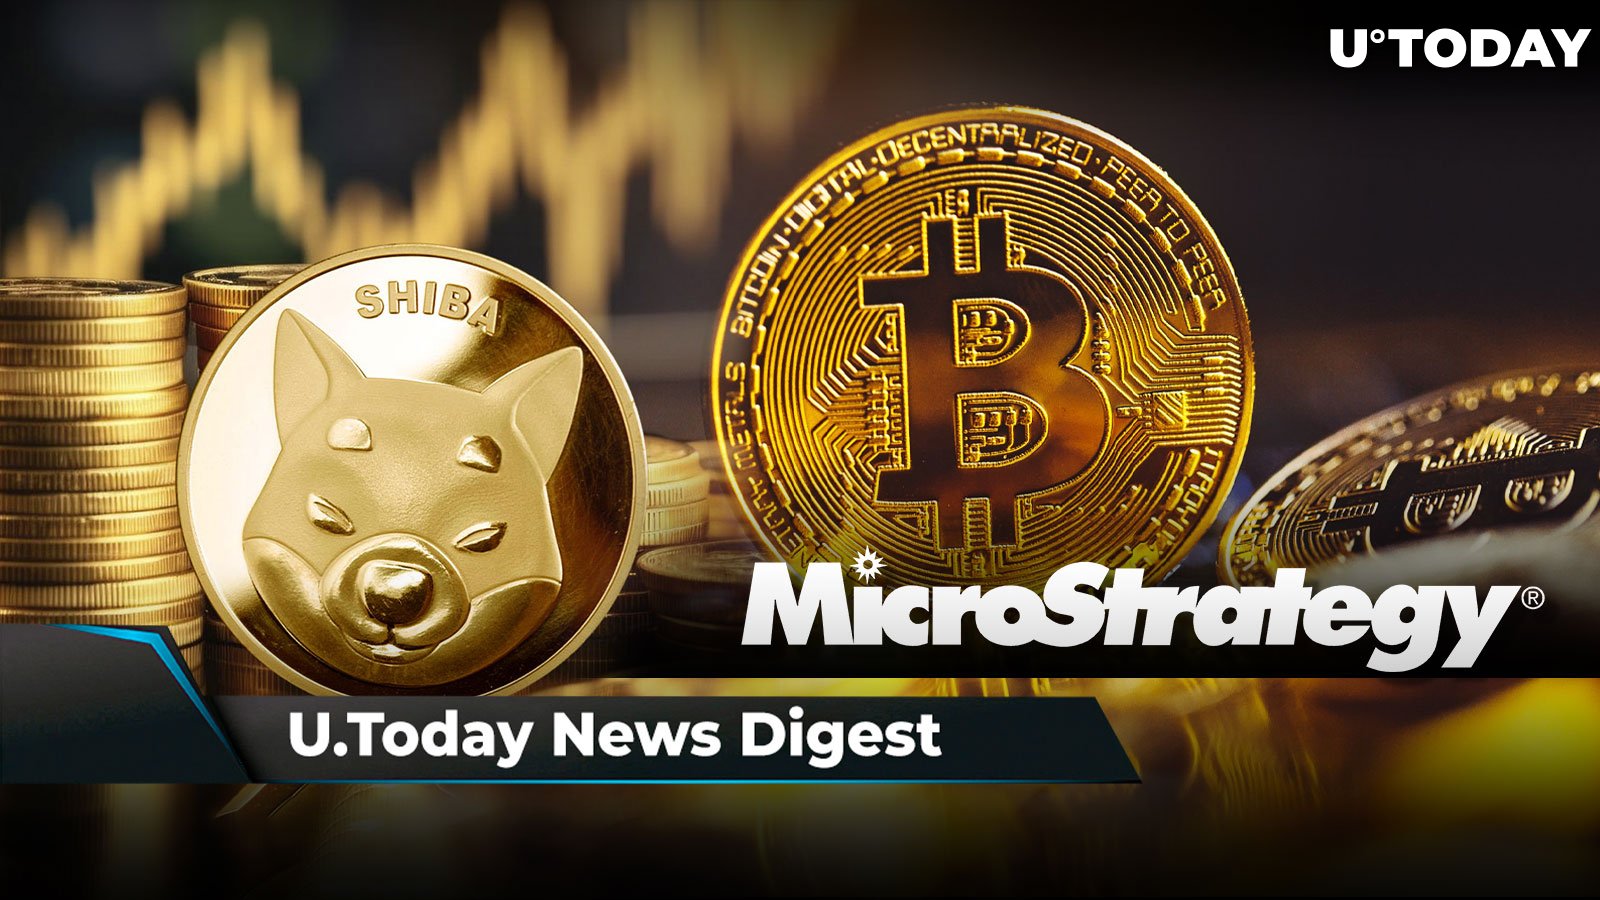 SHIB on Verge of Gaining Another Zero, MicroStrategy Announces Massive Bitcoin Purchase, XRP and ADA Score Major New Listing on Binance: Crypto News Digest by U.Today